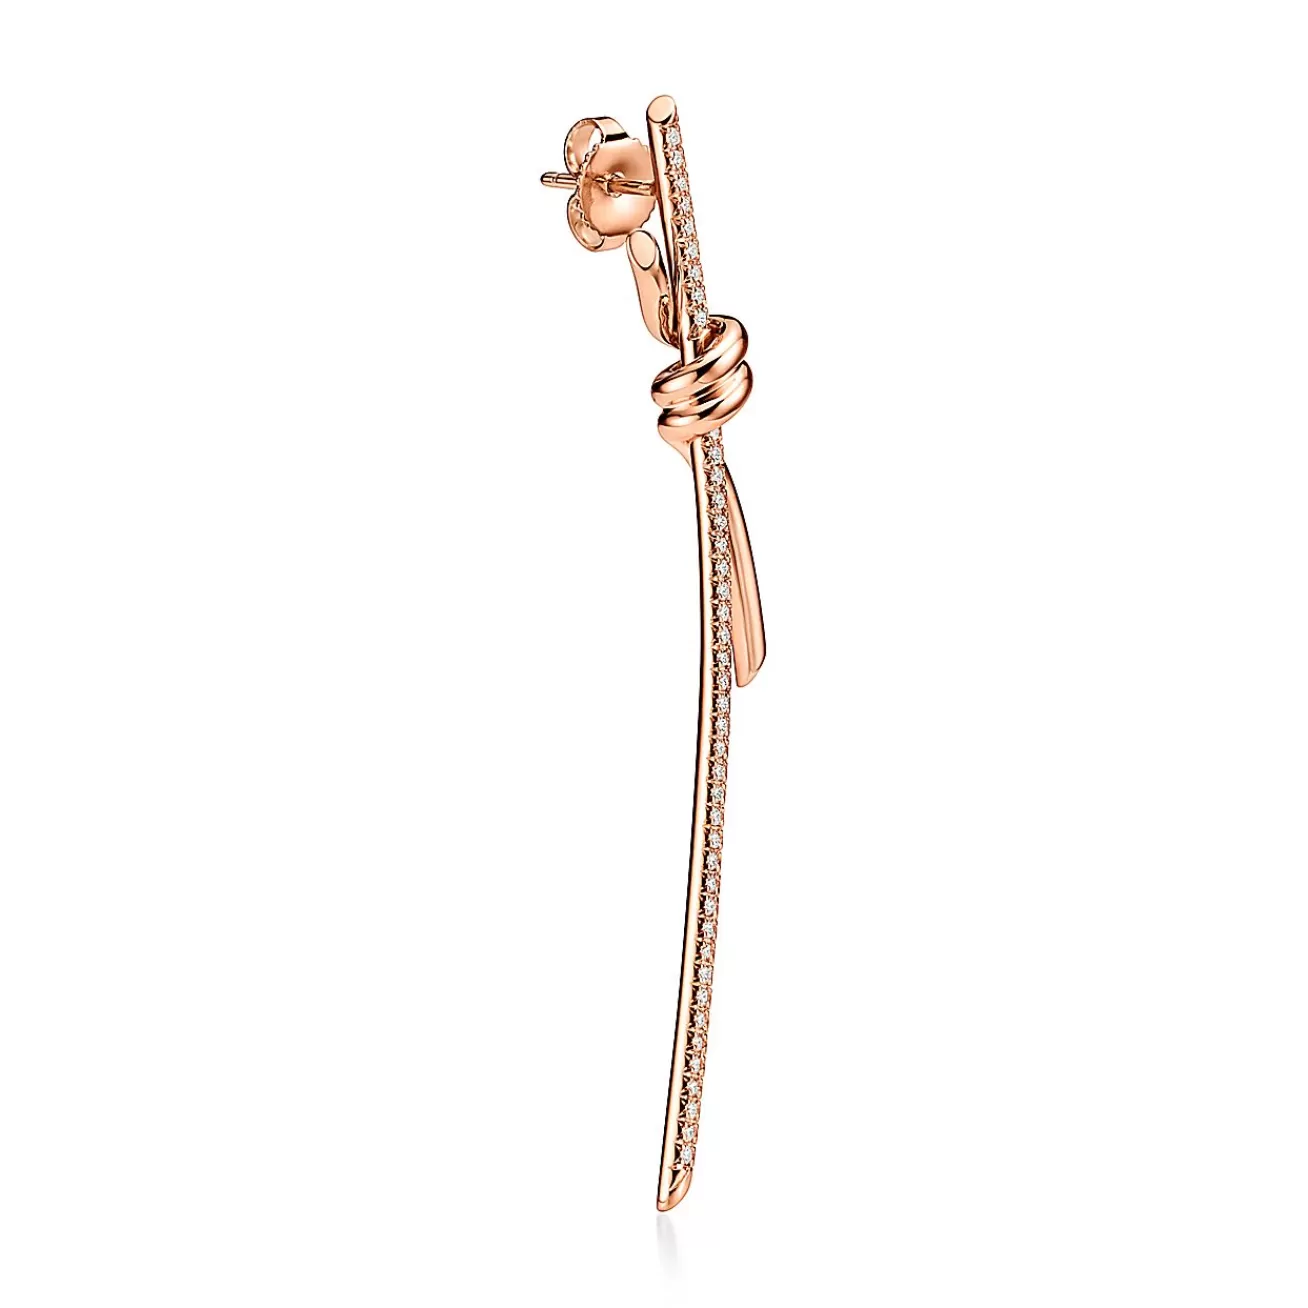 Tiffany & Co. Tiffany Knot Drop Earrings in Rose Gold with Diamonds | ^ Earrings | Rose Gold Jewelry